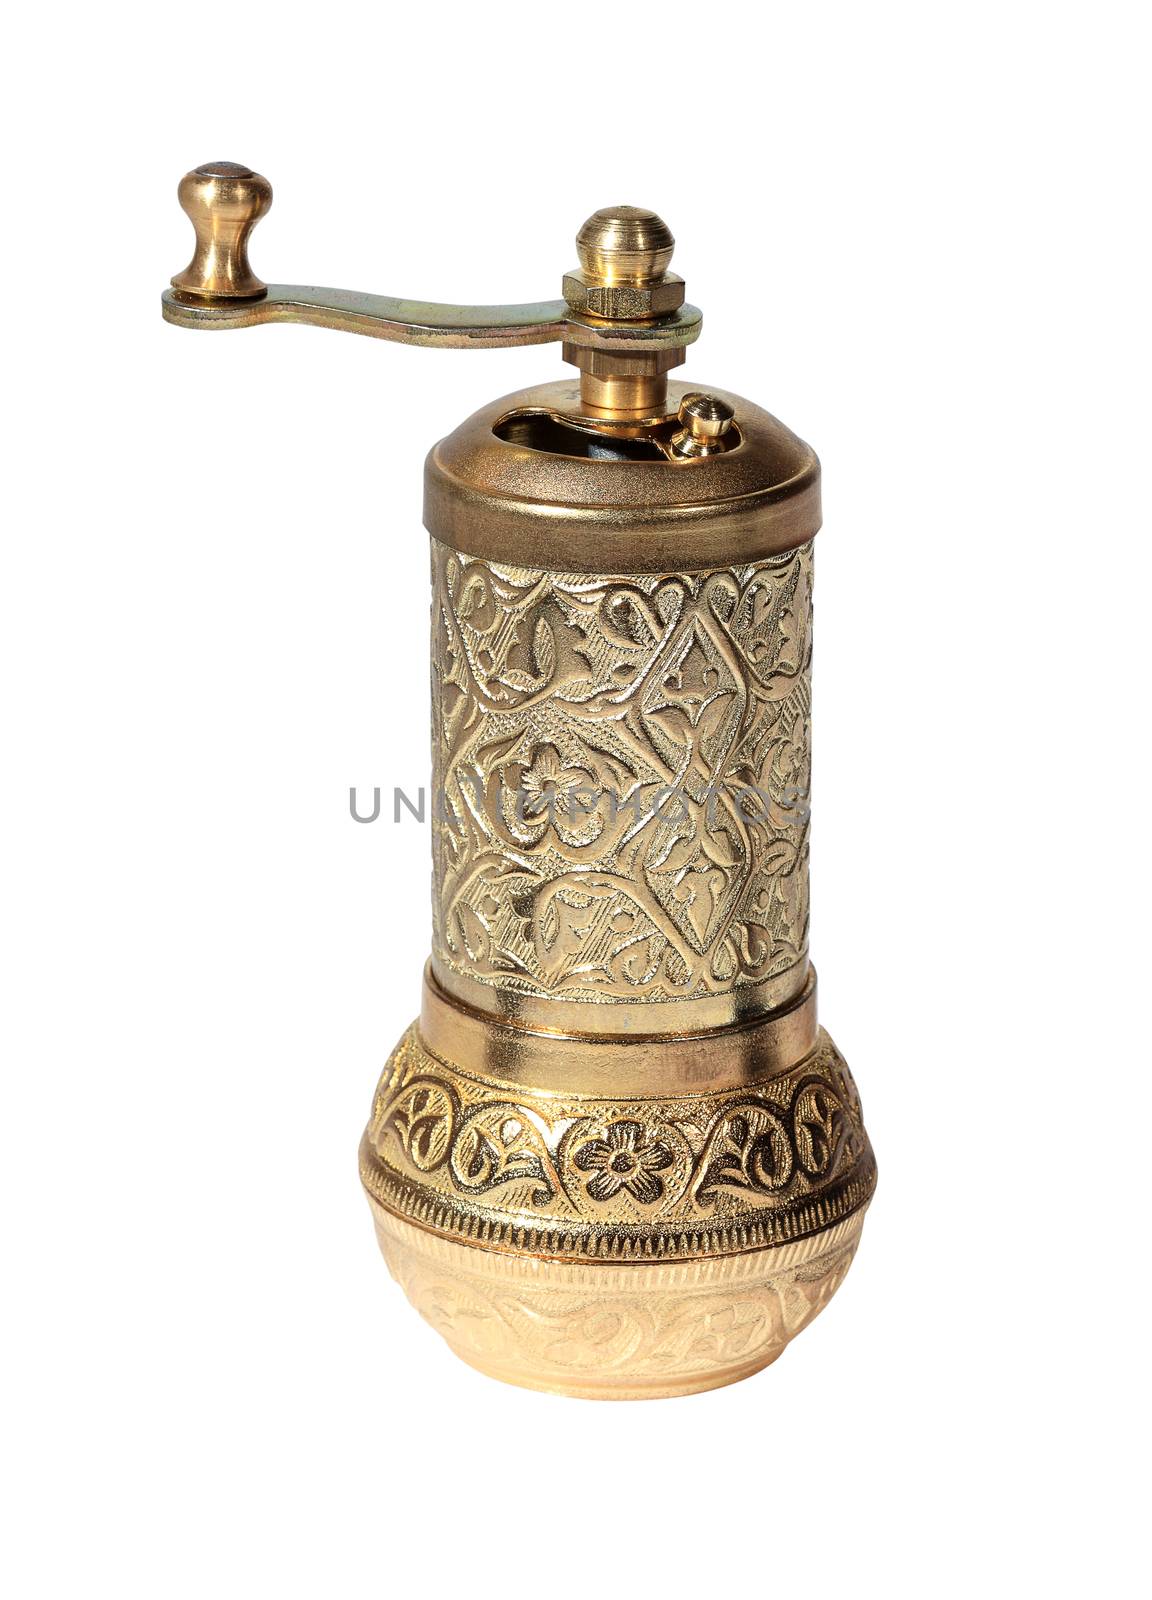 Old Turkish metal grinder on the white background, isolated.